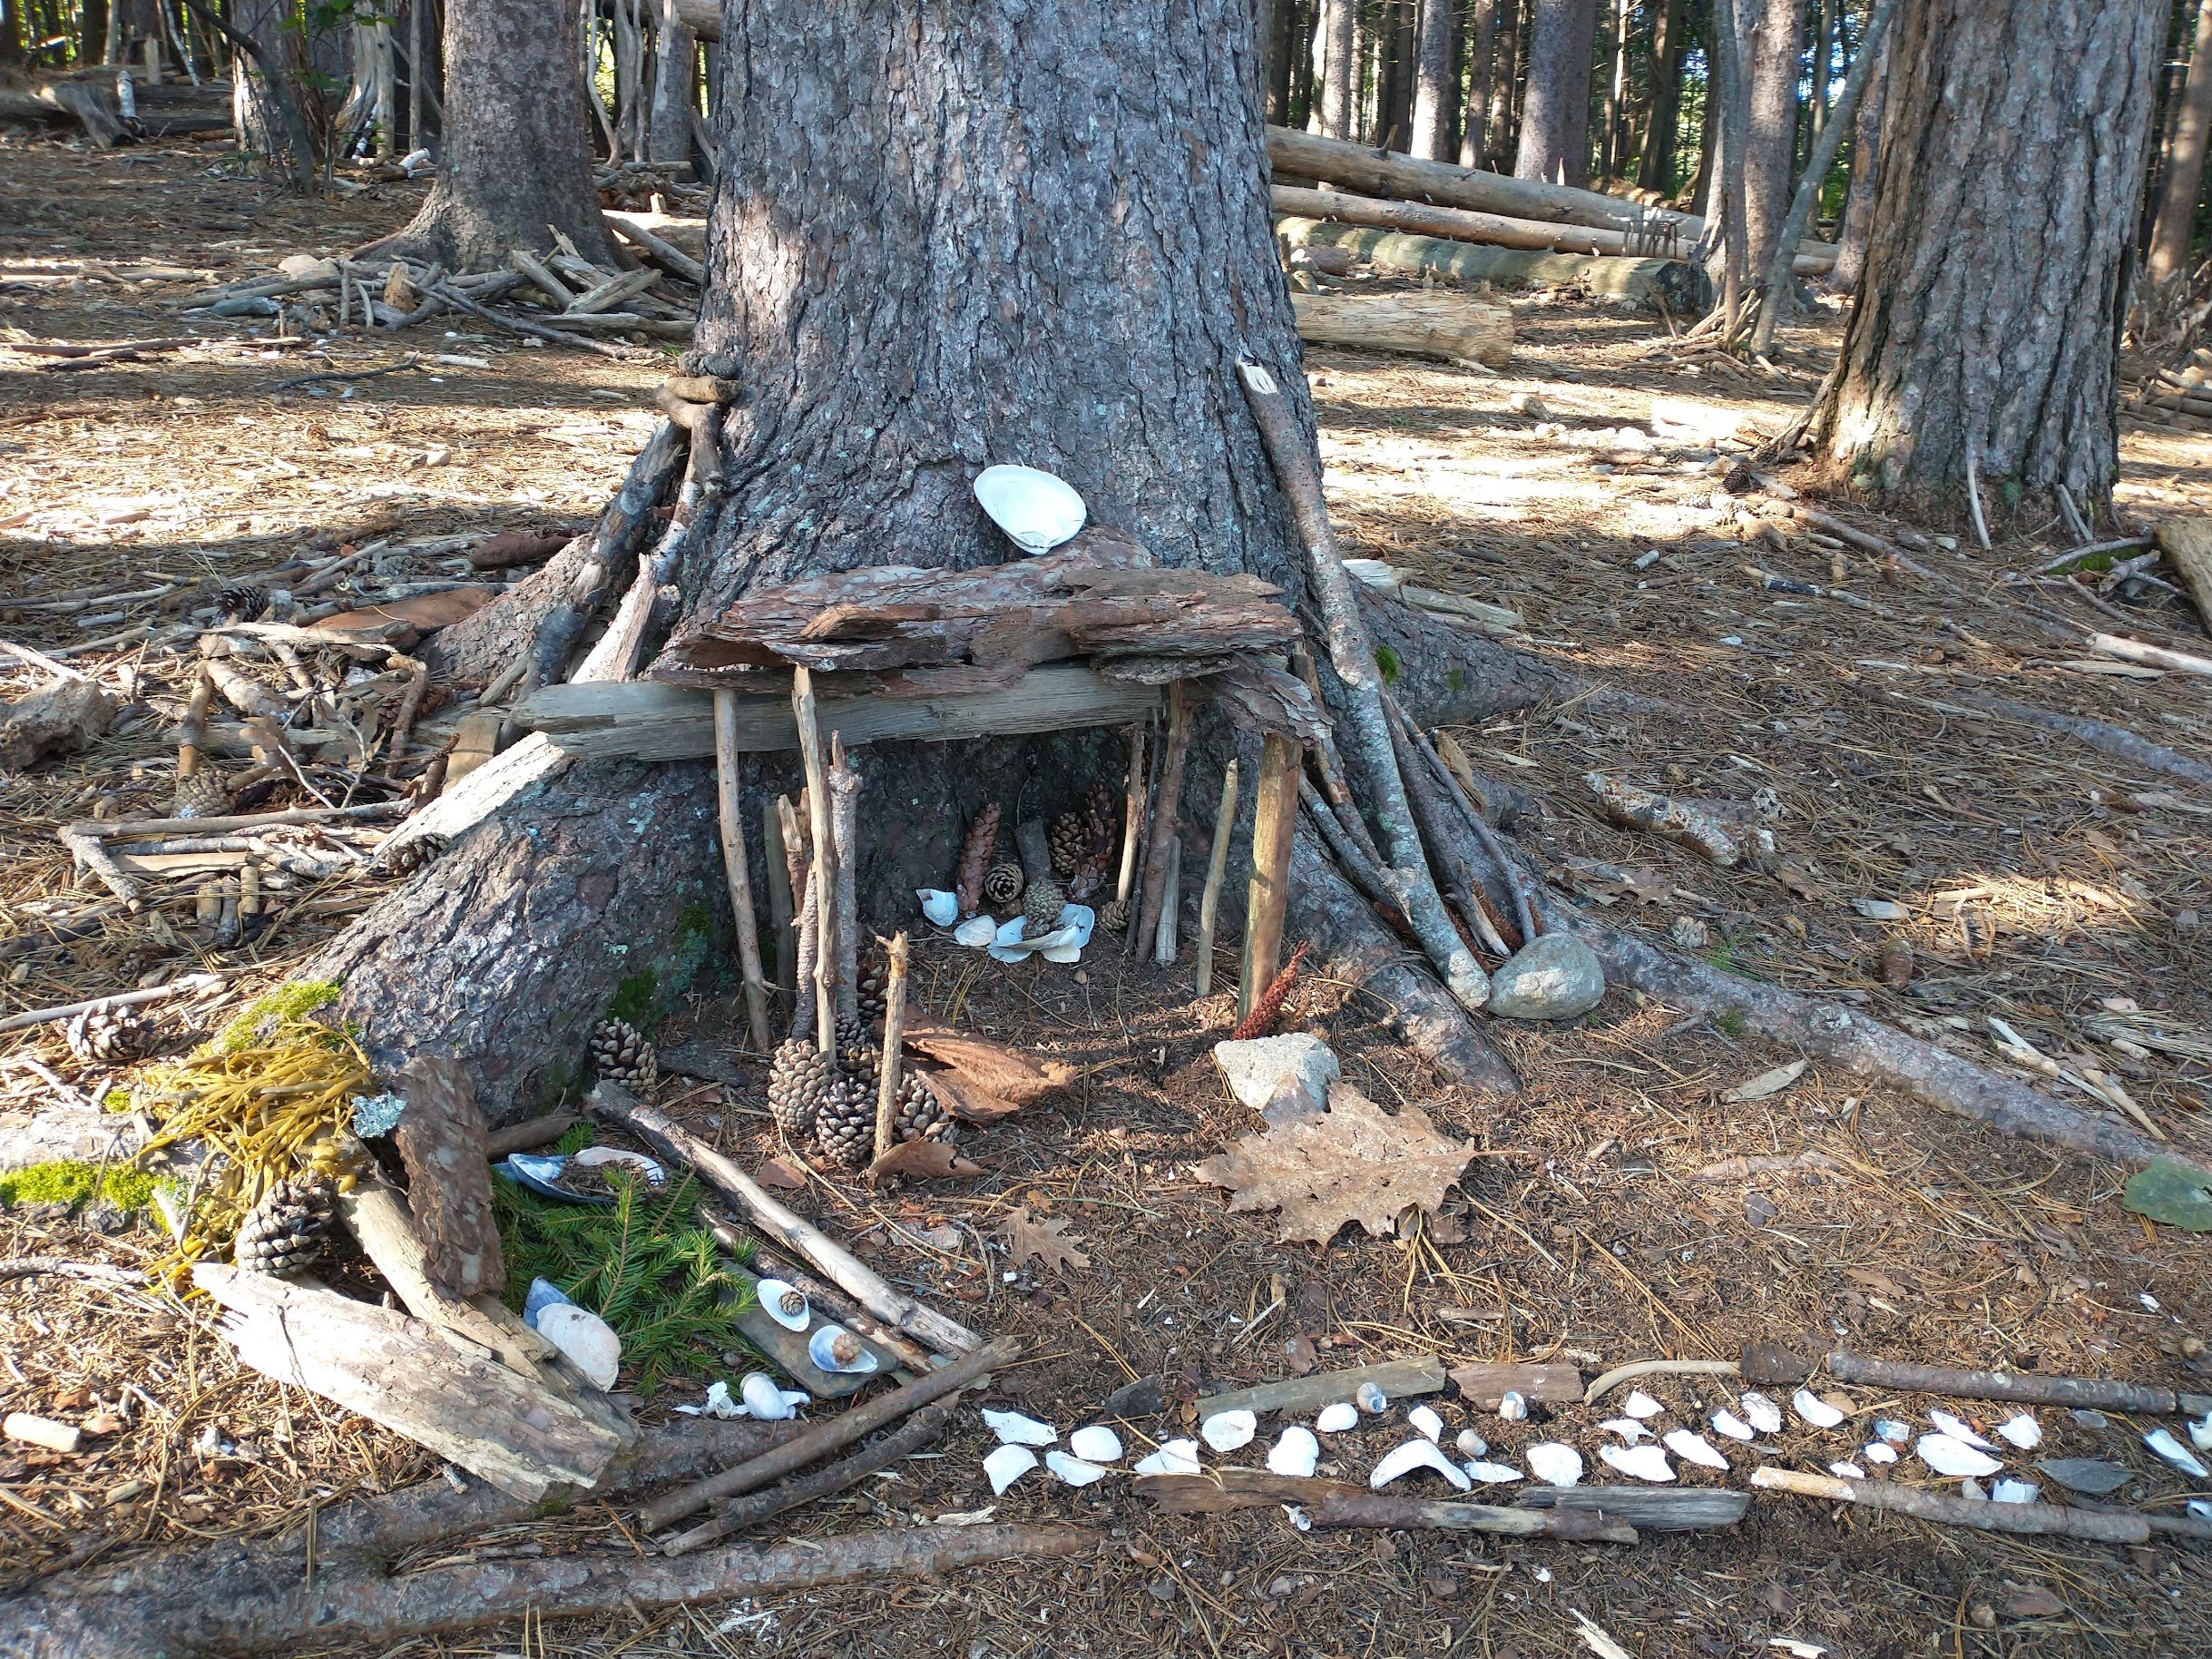 The bottom of a tree trunk that's been fashioned into a fairy house with sticks for a doorway and a pebble path.